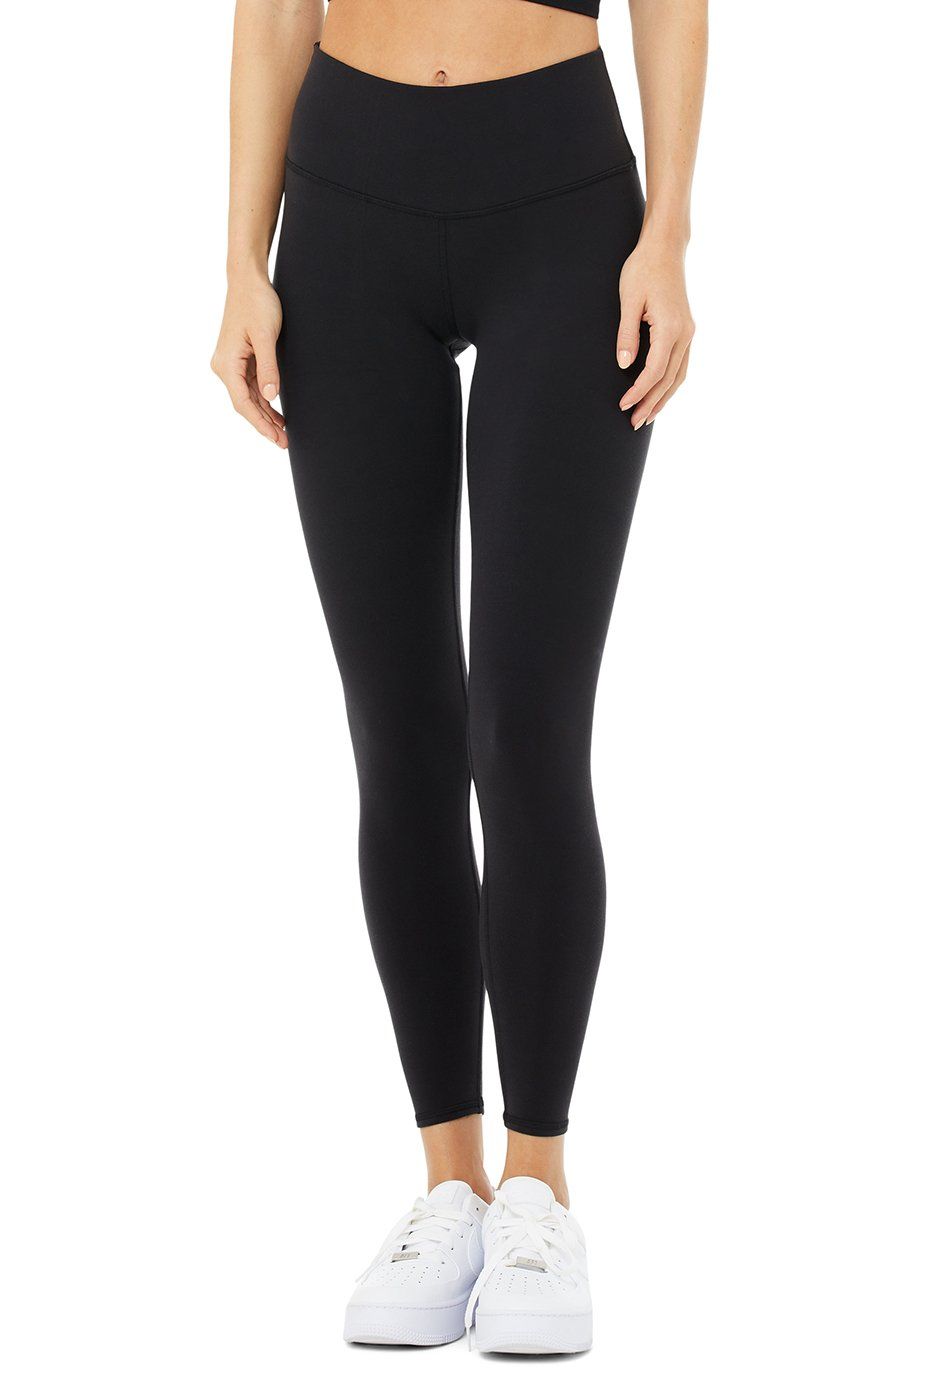 These Are The Best Leggings That Don't Slip Down When You Work Out -  SHEfinds